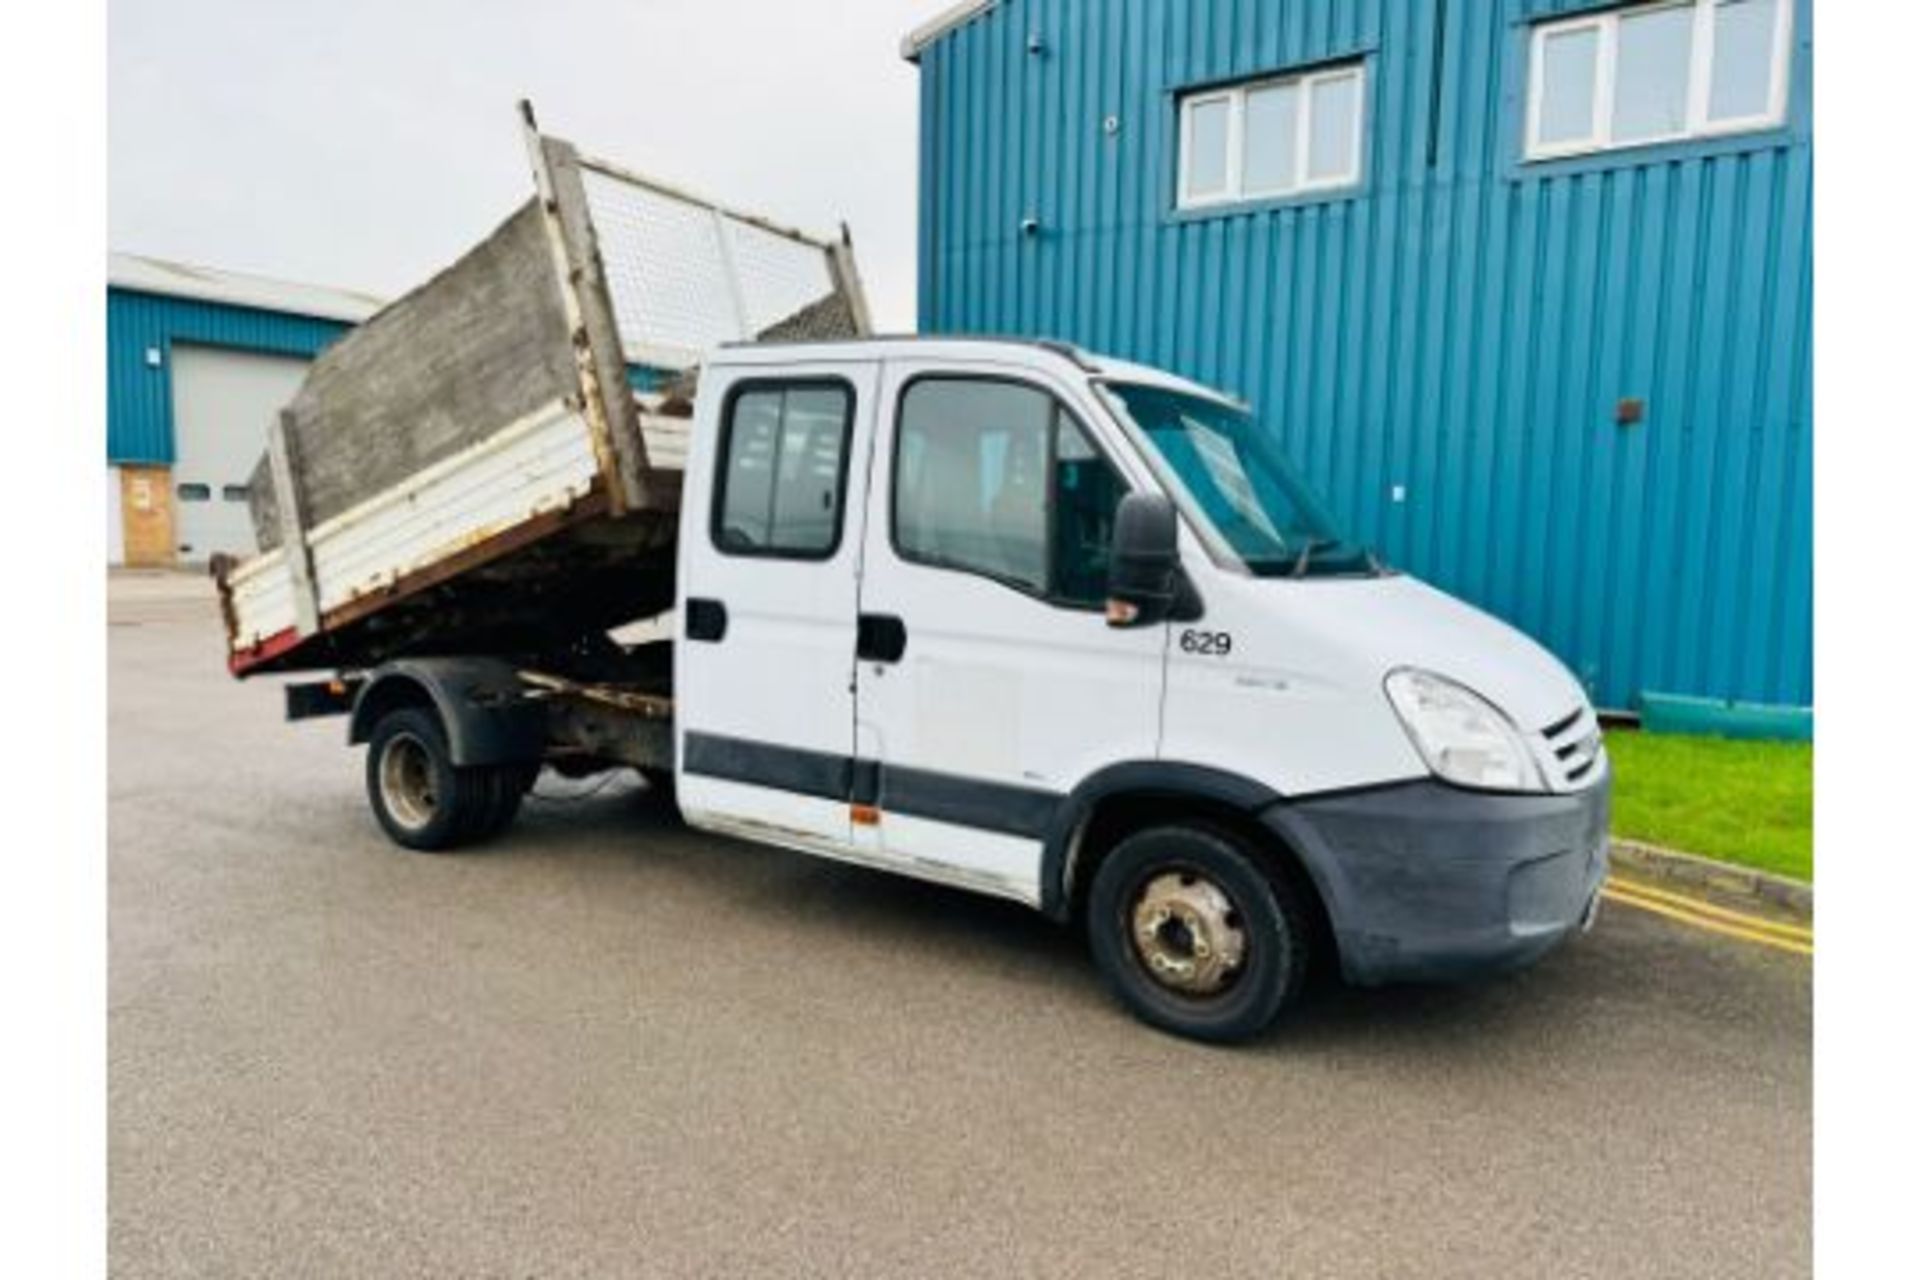 (RESERVE MET)Iveco Daily 2.3 TD 35C13 Double Cab Tipper - 2009 09 Reg - TRW - 7 Seater - 98k - Image 2 of 18